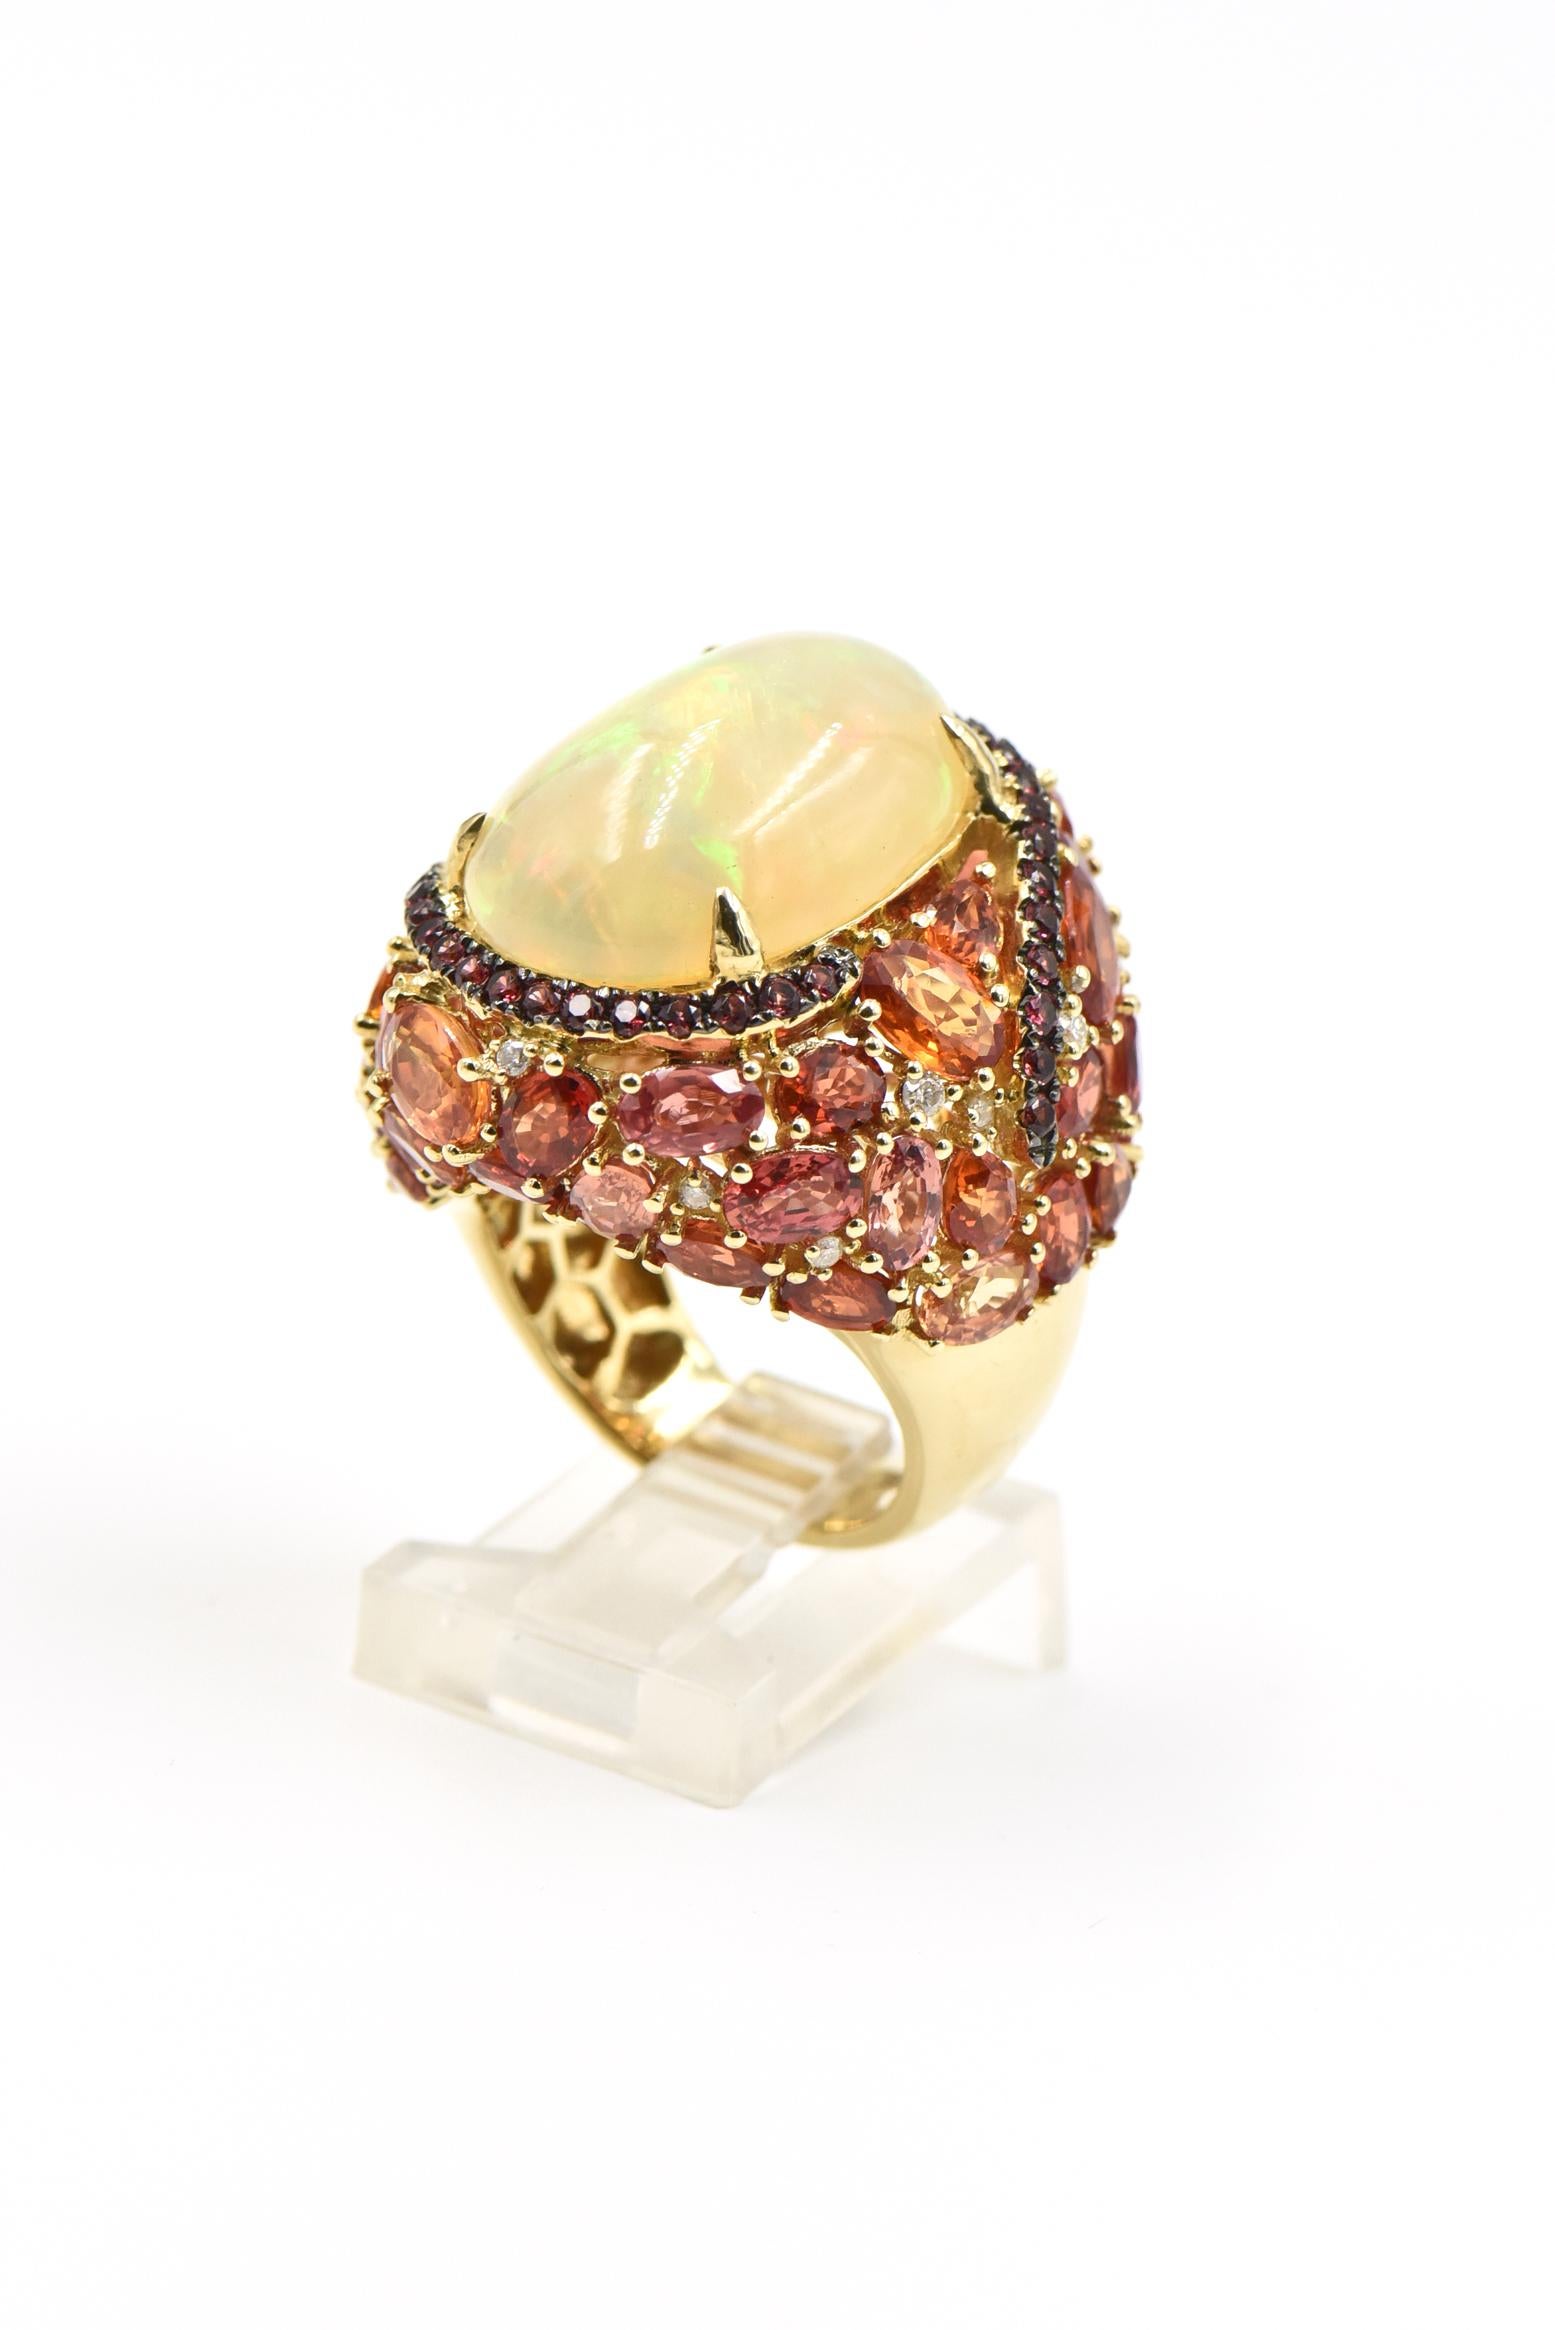 Beautifully made 18k yellow gold cocktail ring featuring a prong set 9.18 carat opal set in a pink sapphire swirl that leads to a cascade of faceted vitrines with .16 carats of diamond accents.  This ring is truly spectacular even the back has a